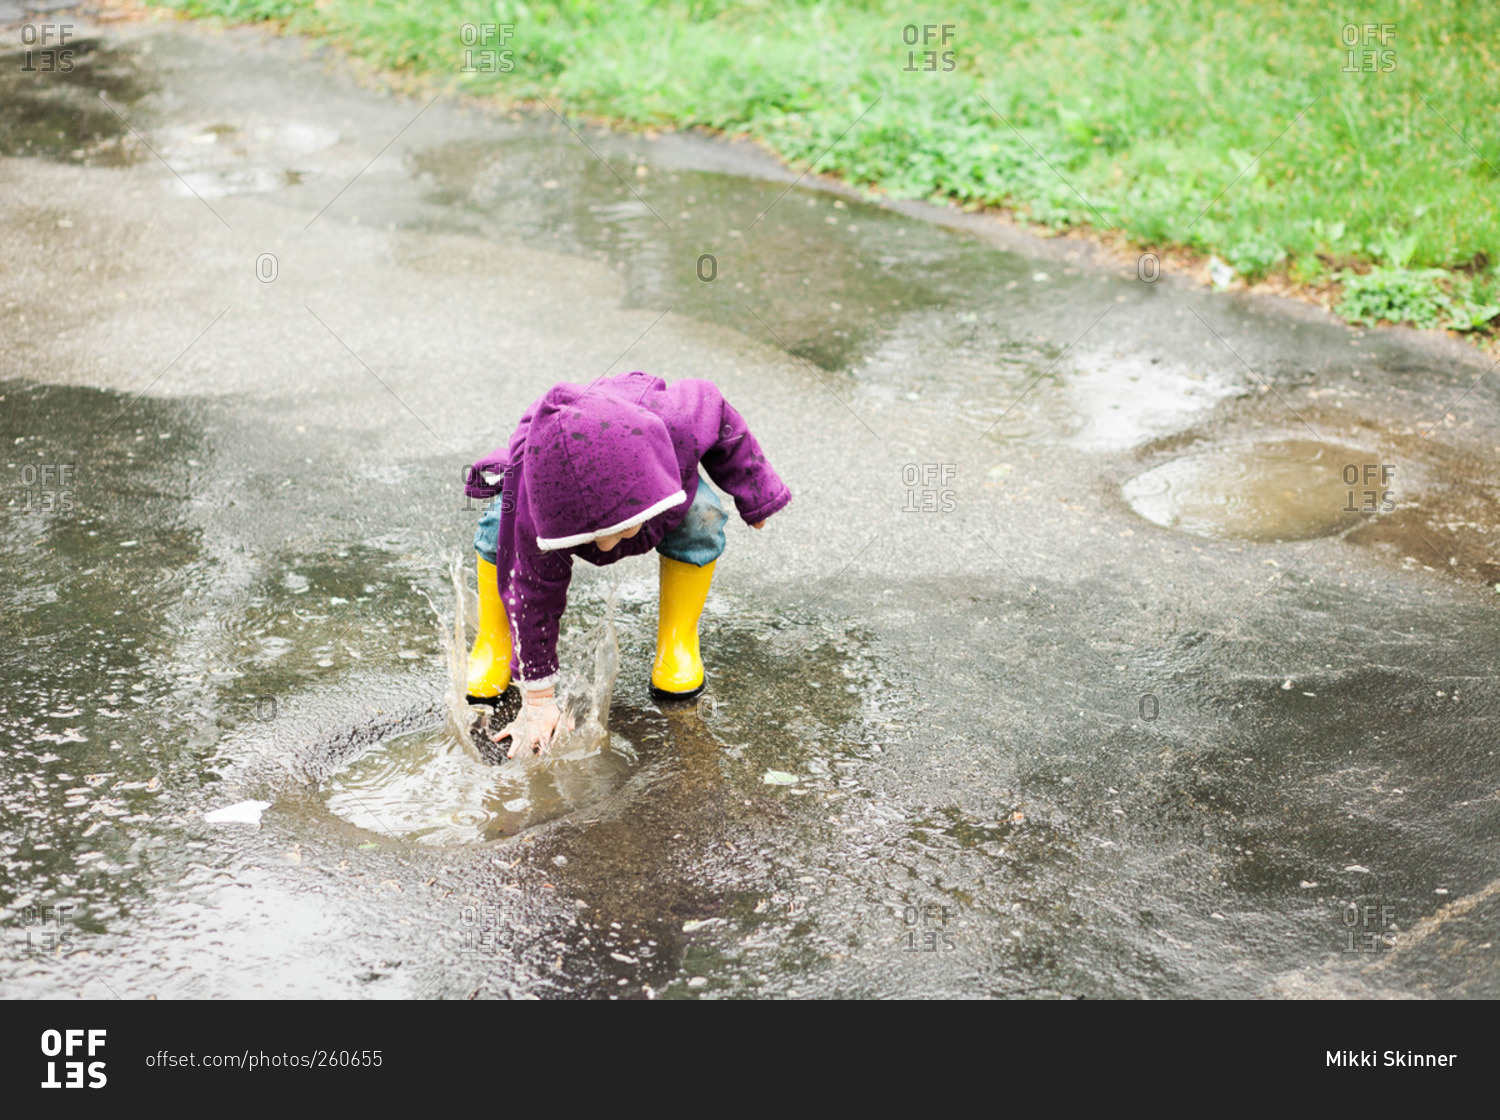 Girl playing in a rain puddle on concrete